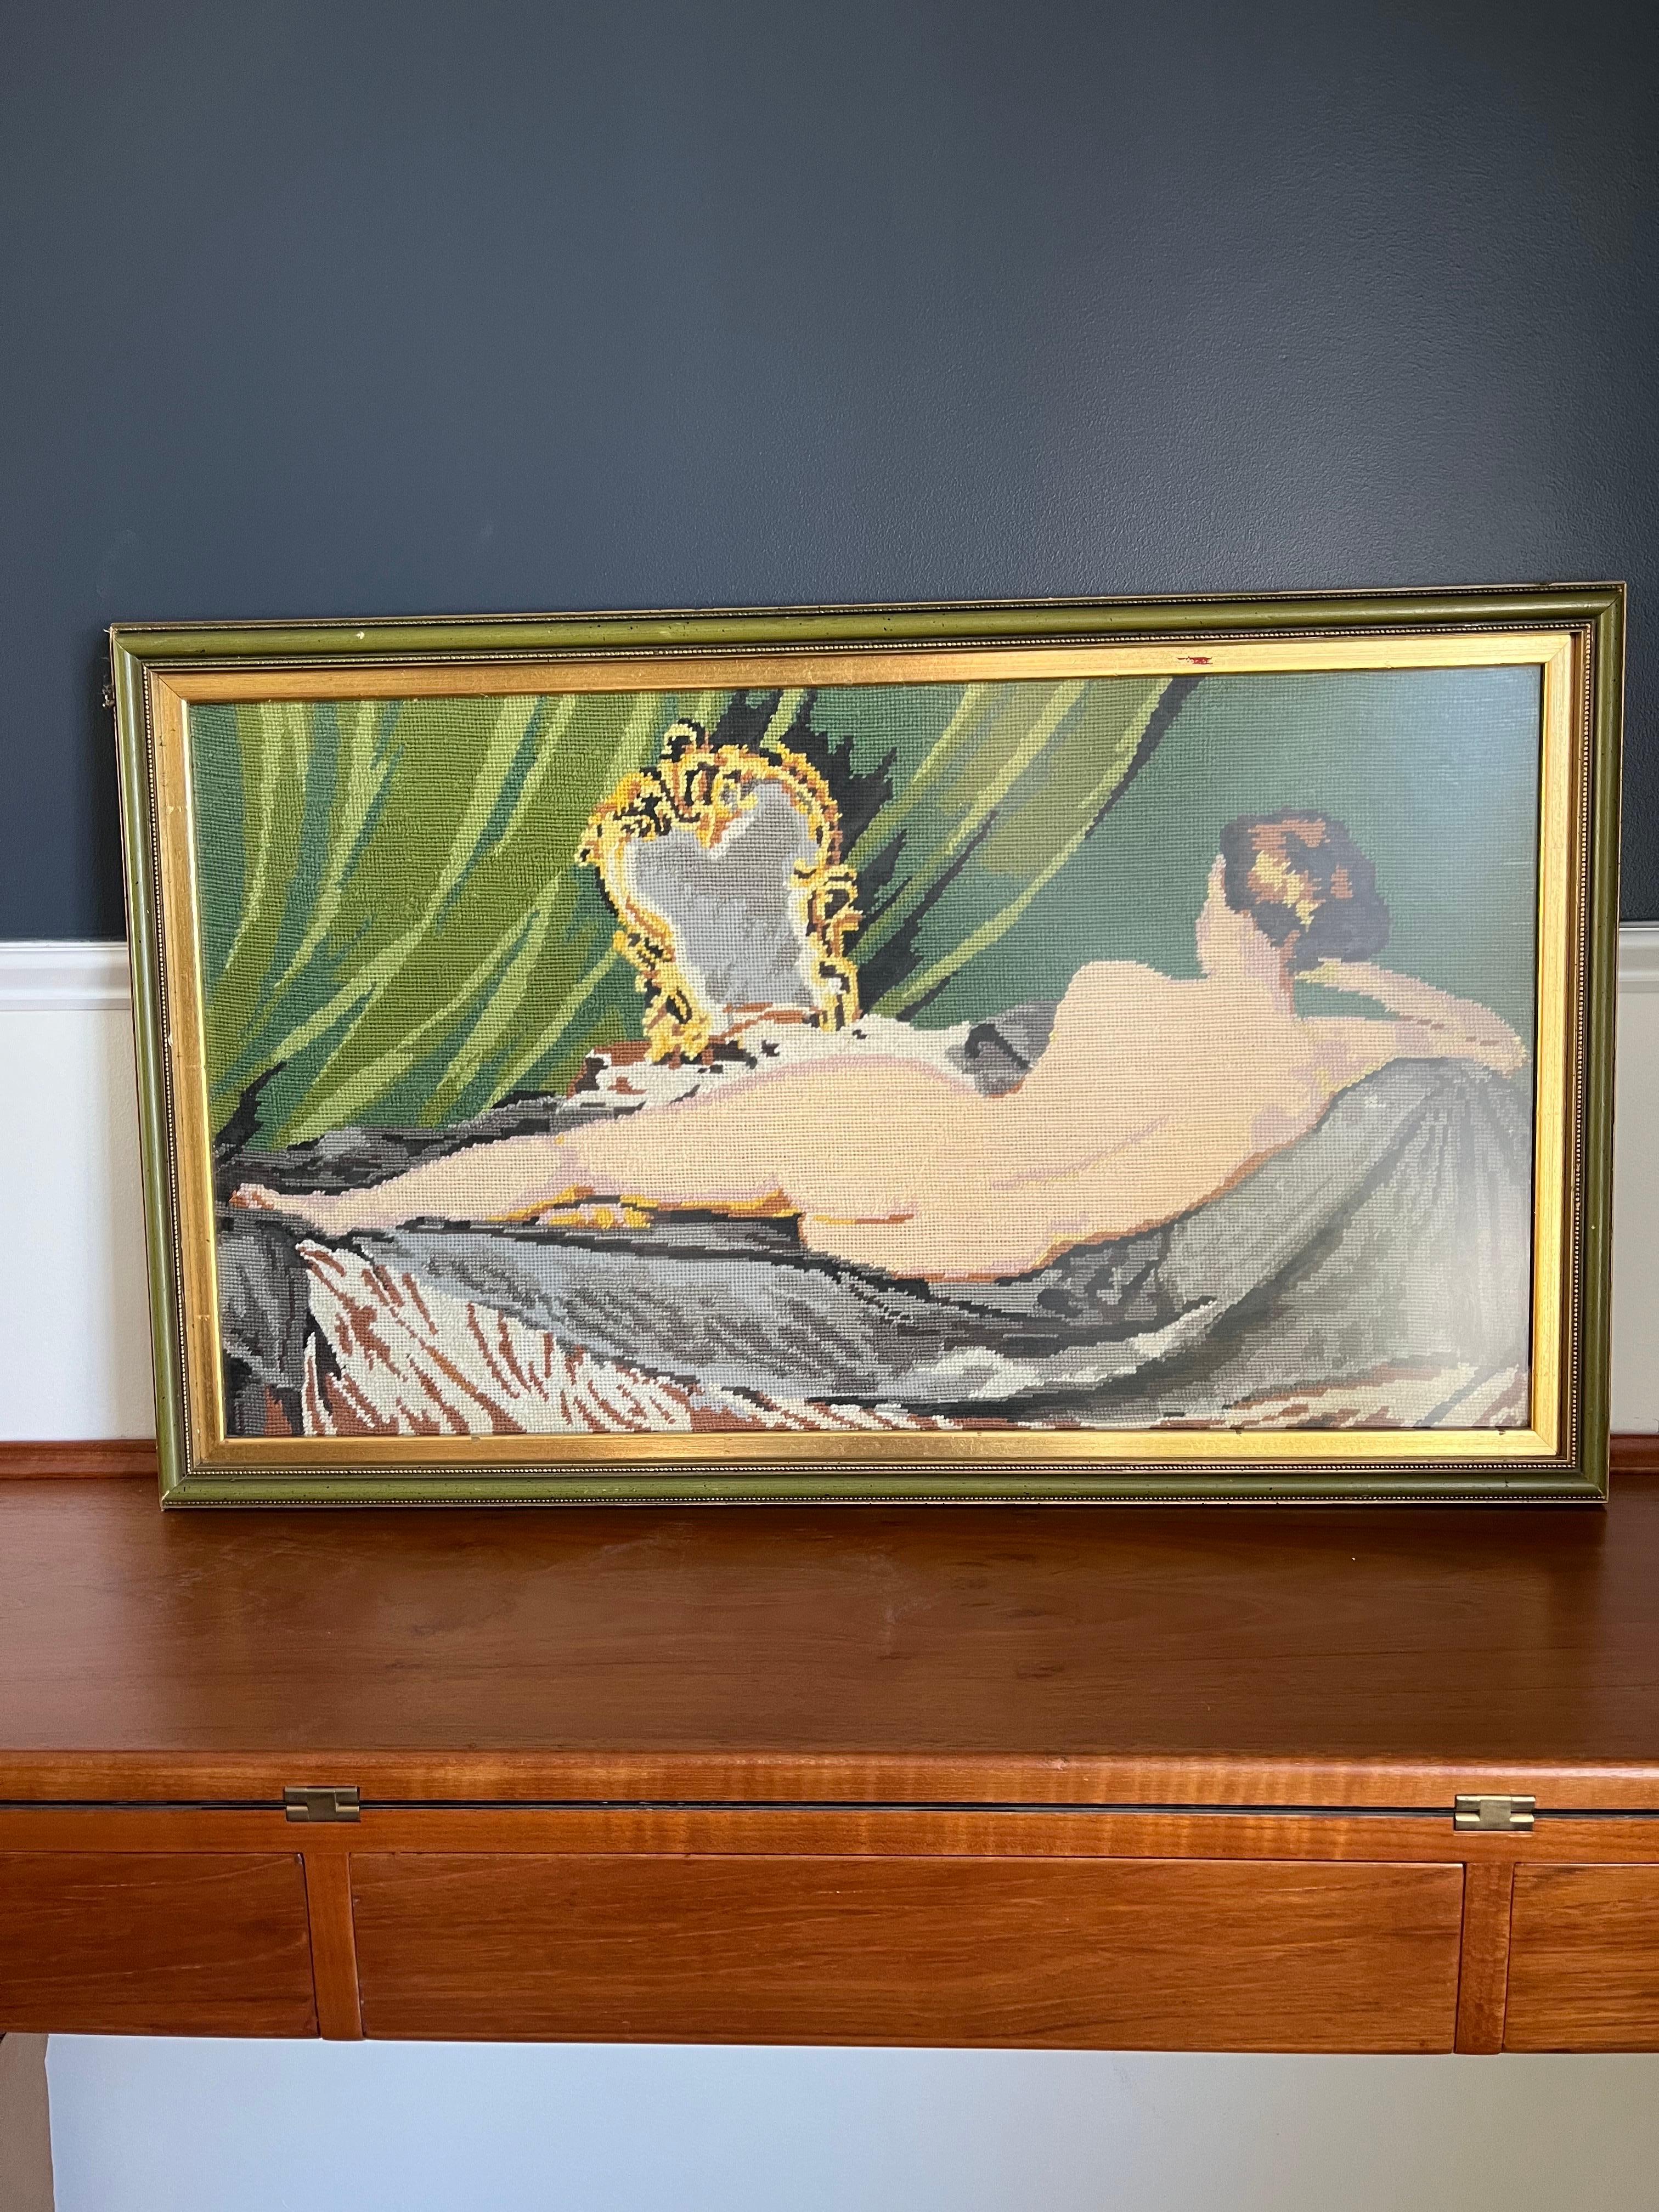 Beautiful needlepoint nude. After Rokebay Venus. From an estate out of Miami, Fl.